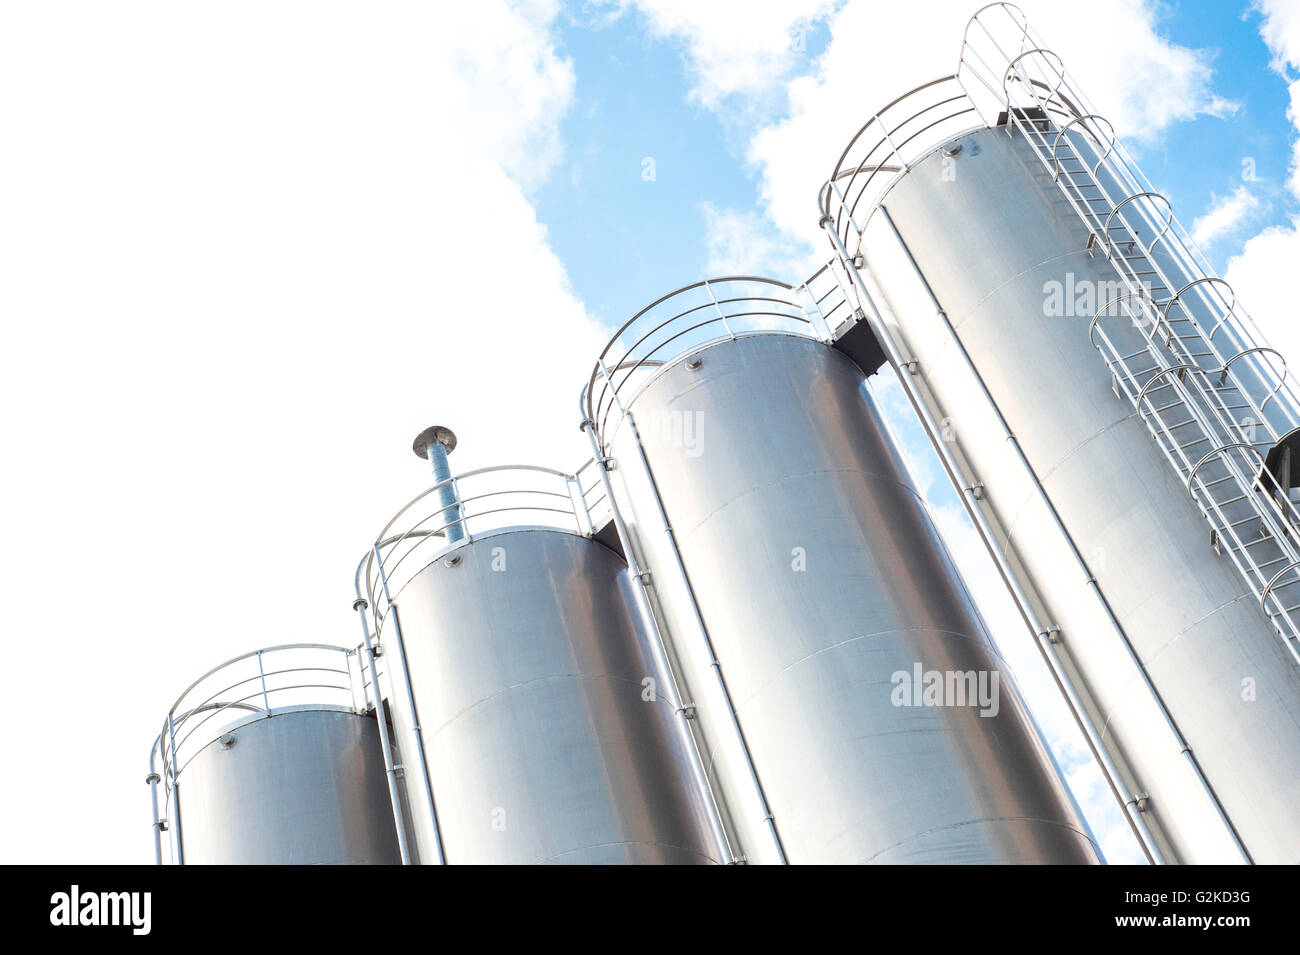 Industrial silos for chemical production, by stainless steel. Stock Photo